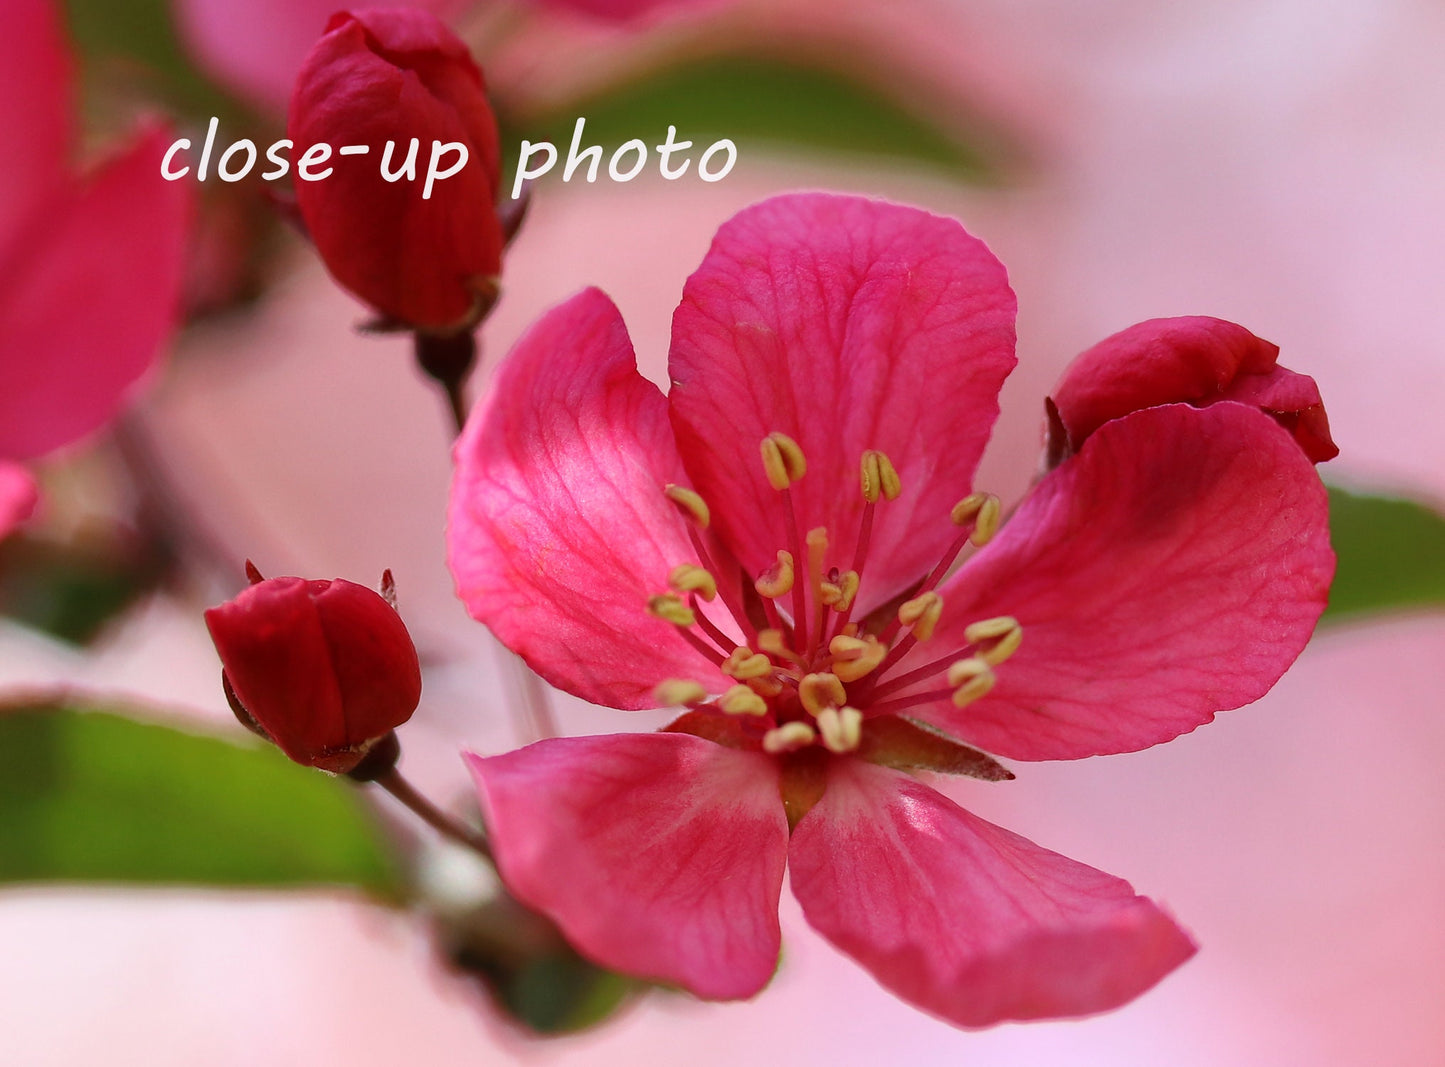 Pink Blossom, blooming crabapple photo print, blush art decor, floral photography wall art, paper, canvas, 5x7 to 32x48", Mother's Day gift